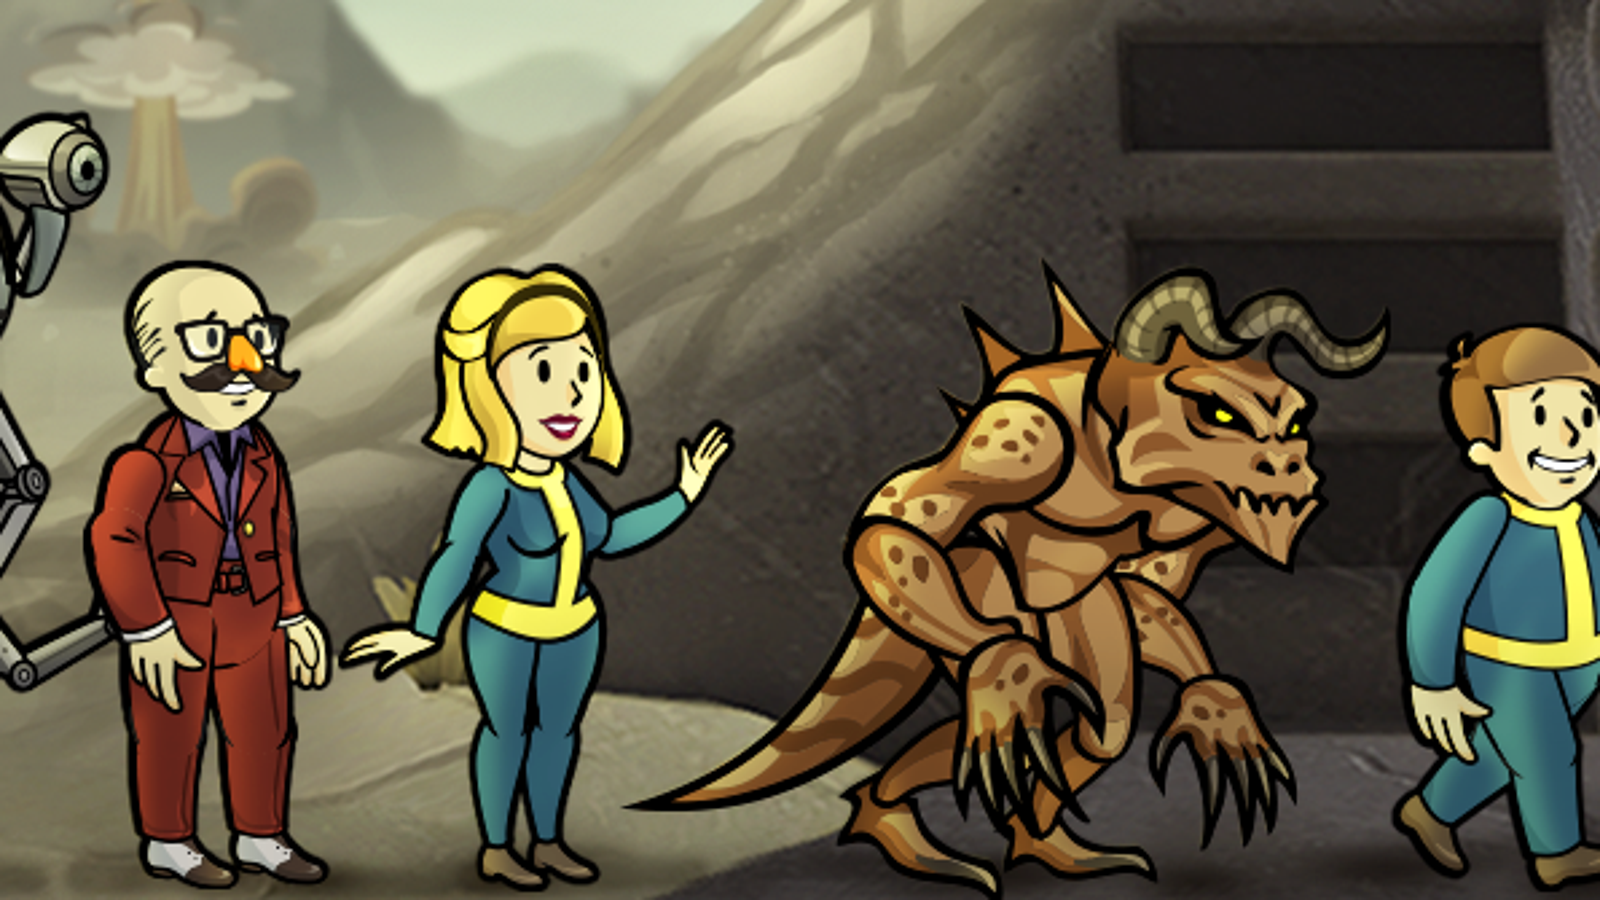 fallout shelter game deathclaw survival mode